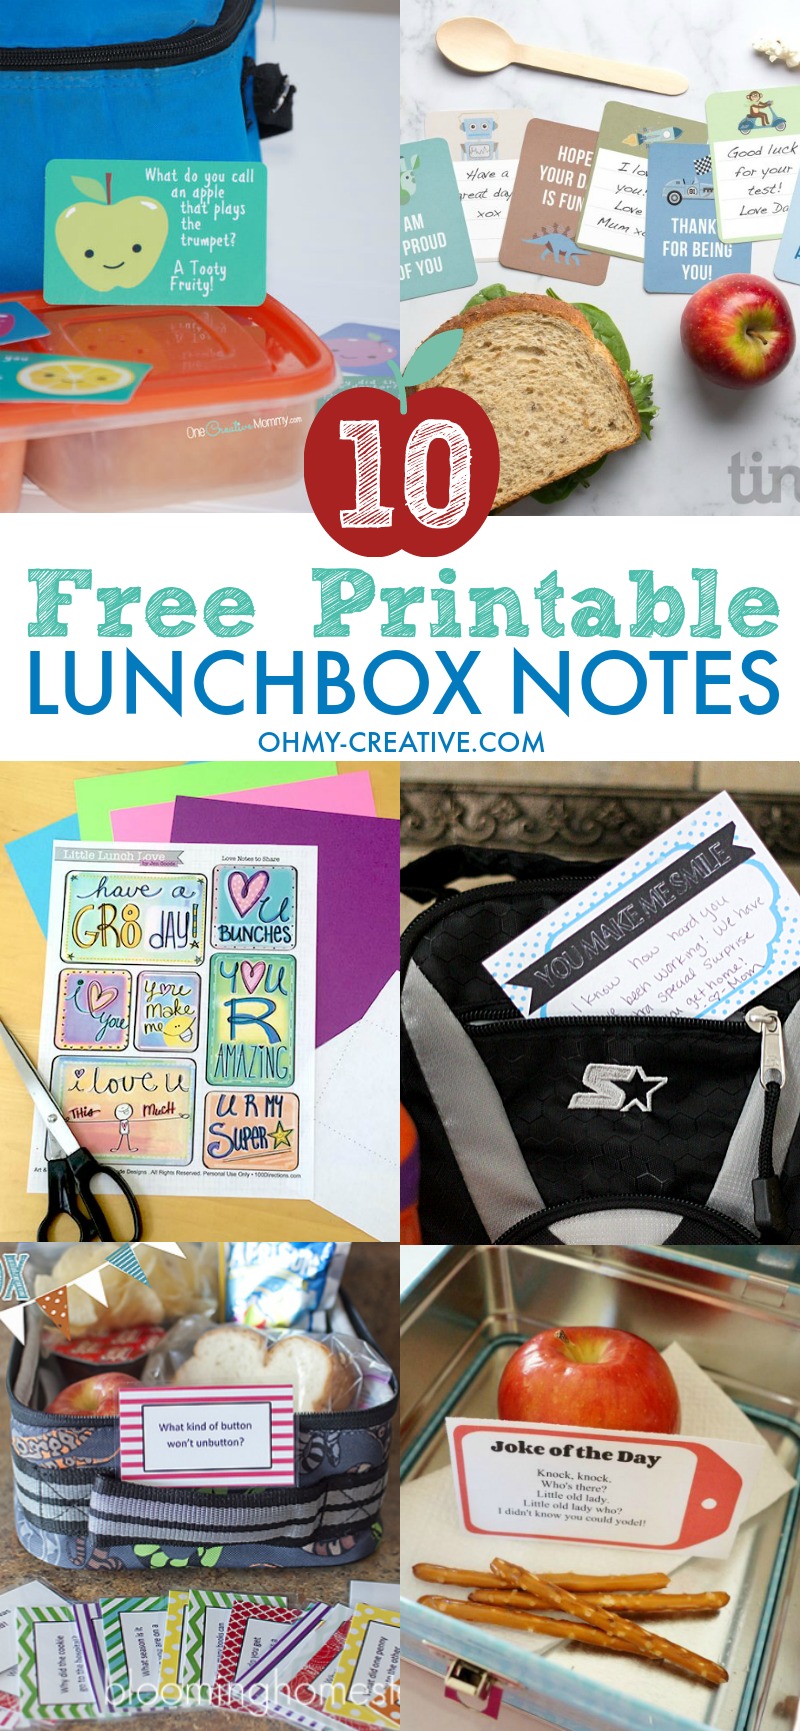 10 Free Printable Lunchbox Notes